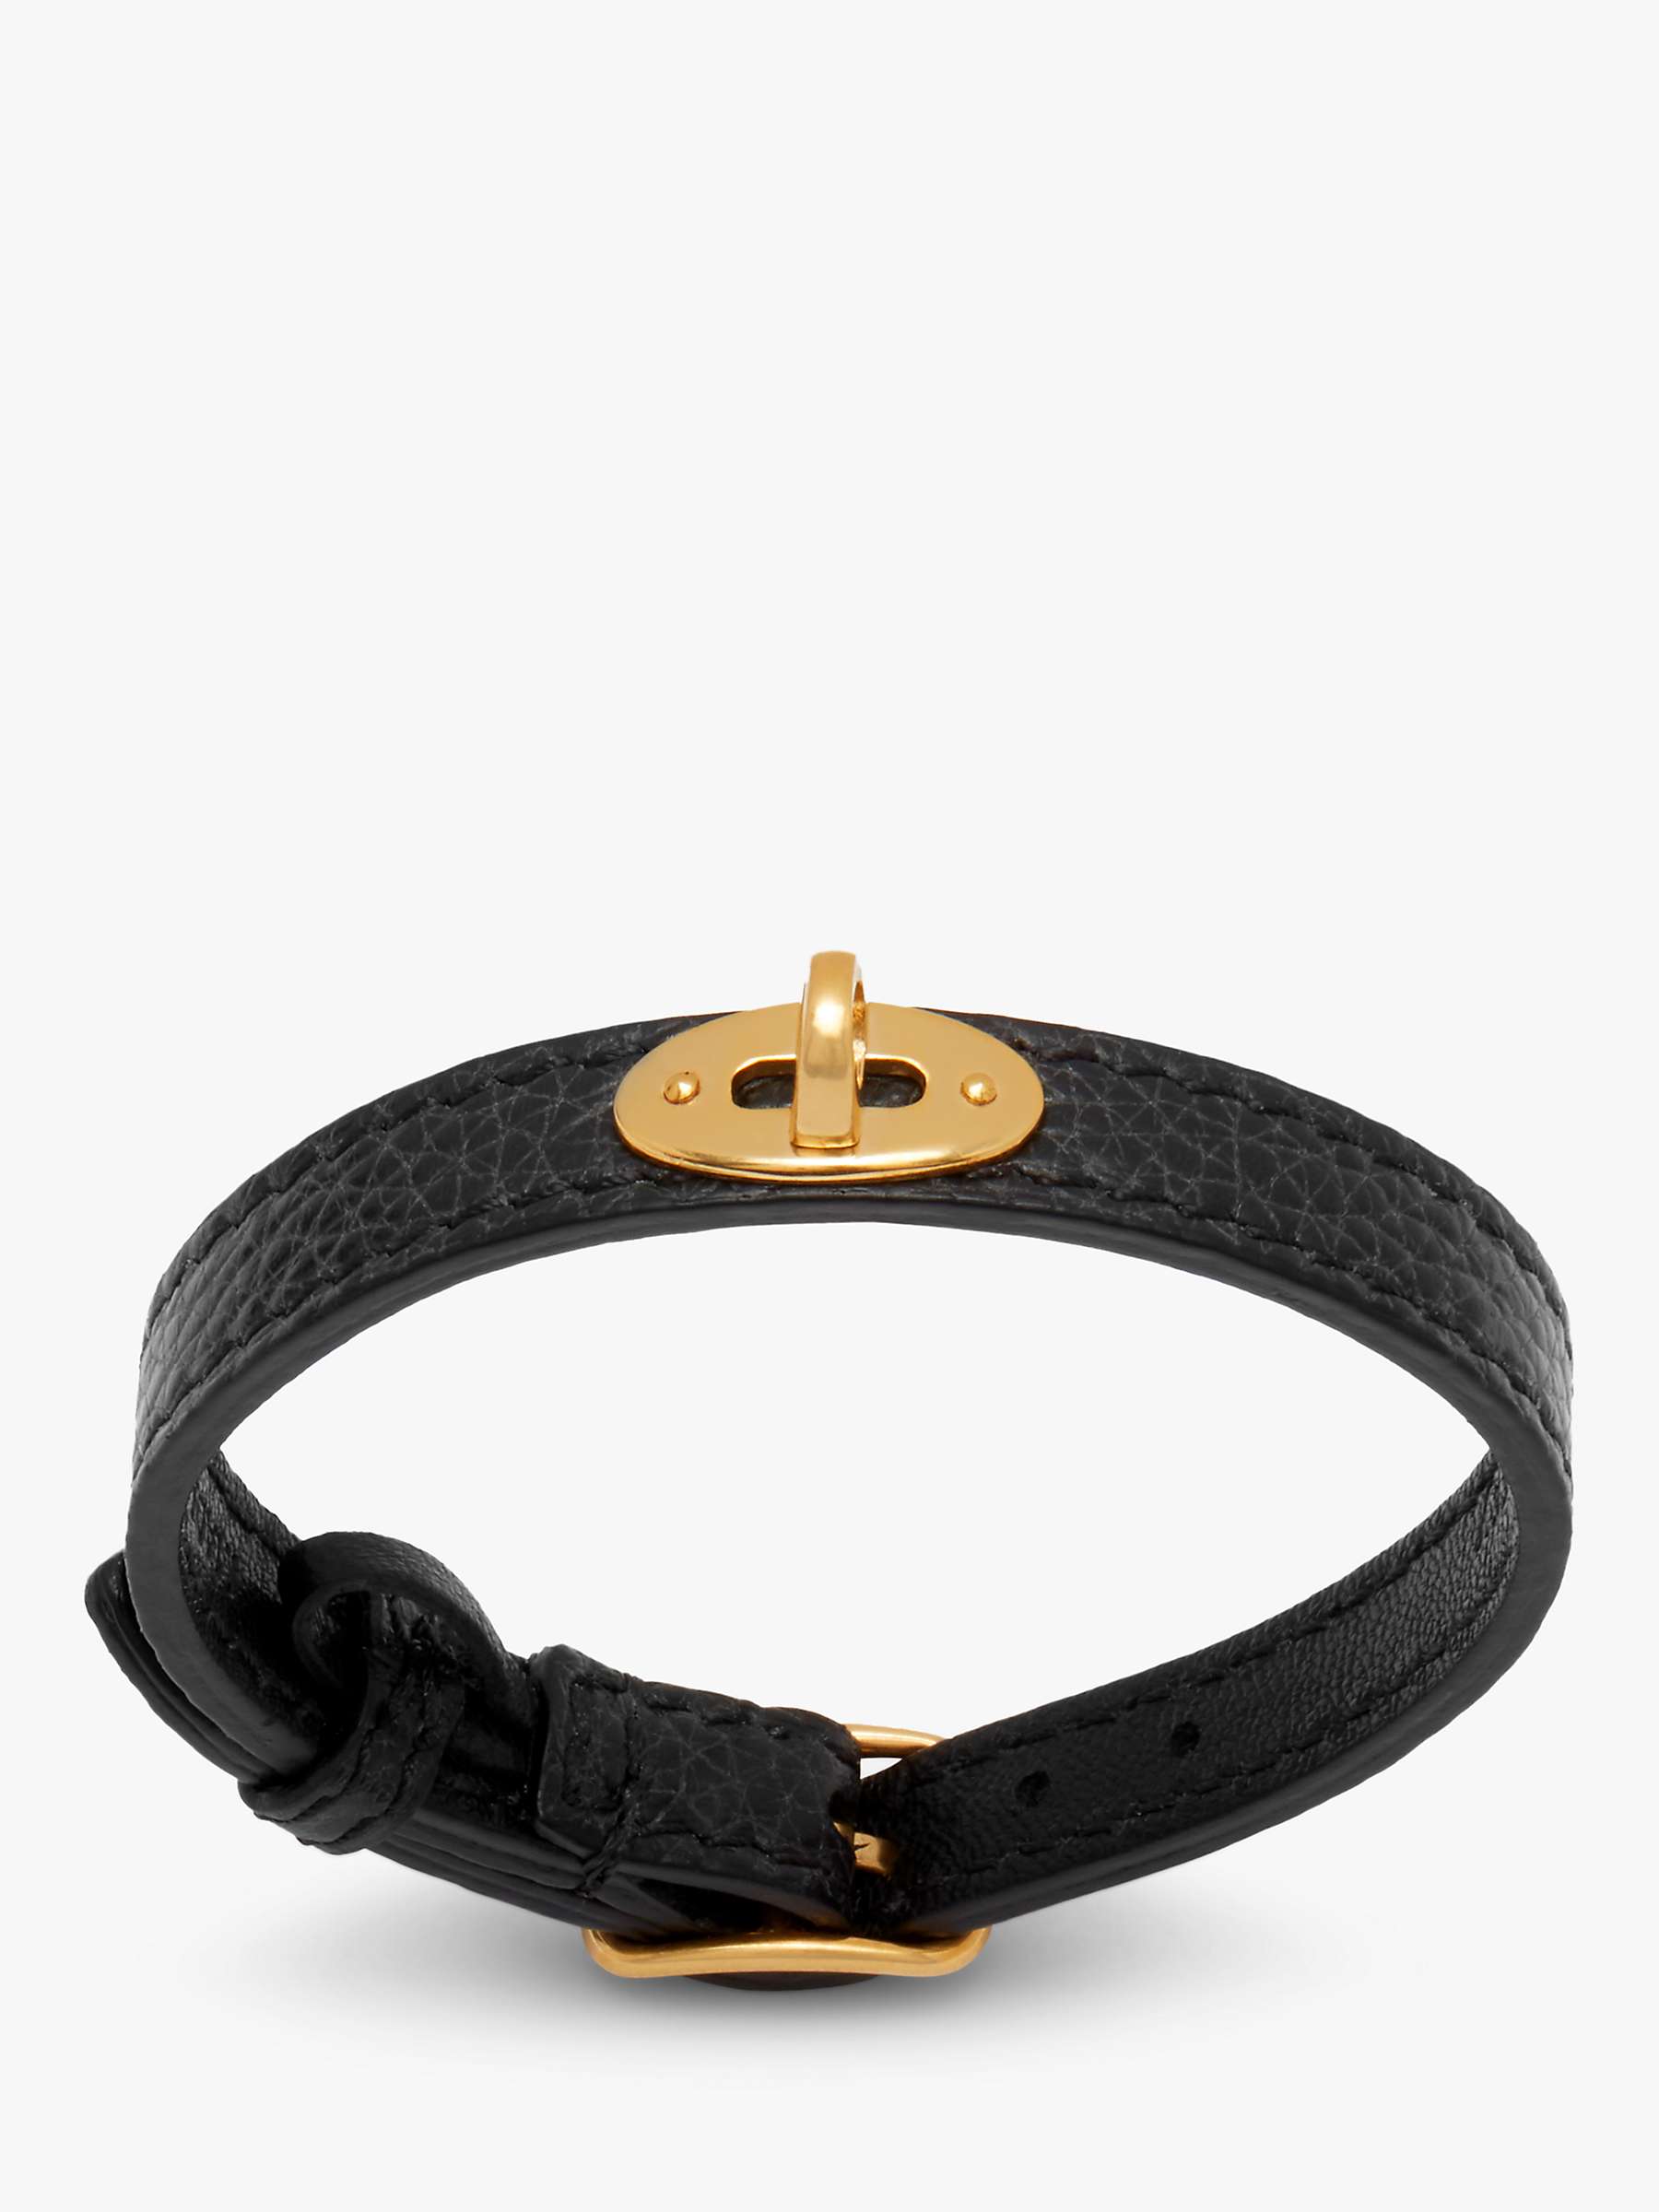 Buy Mulberry Bayswater Small Classic Grain Leather Thin Bracelet Online at johnlewis.com